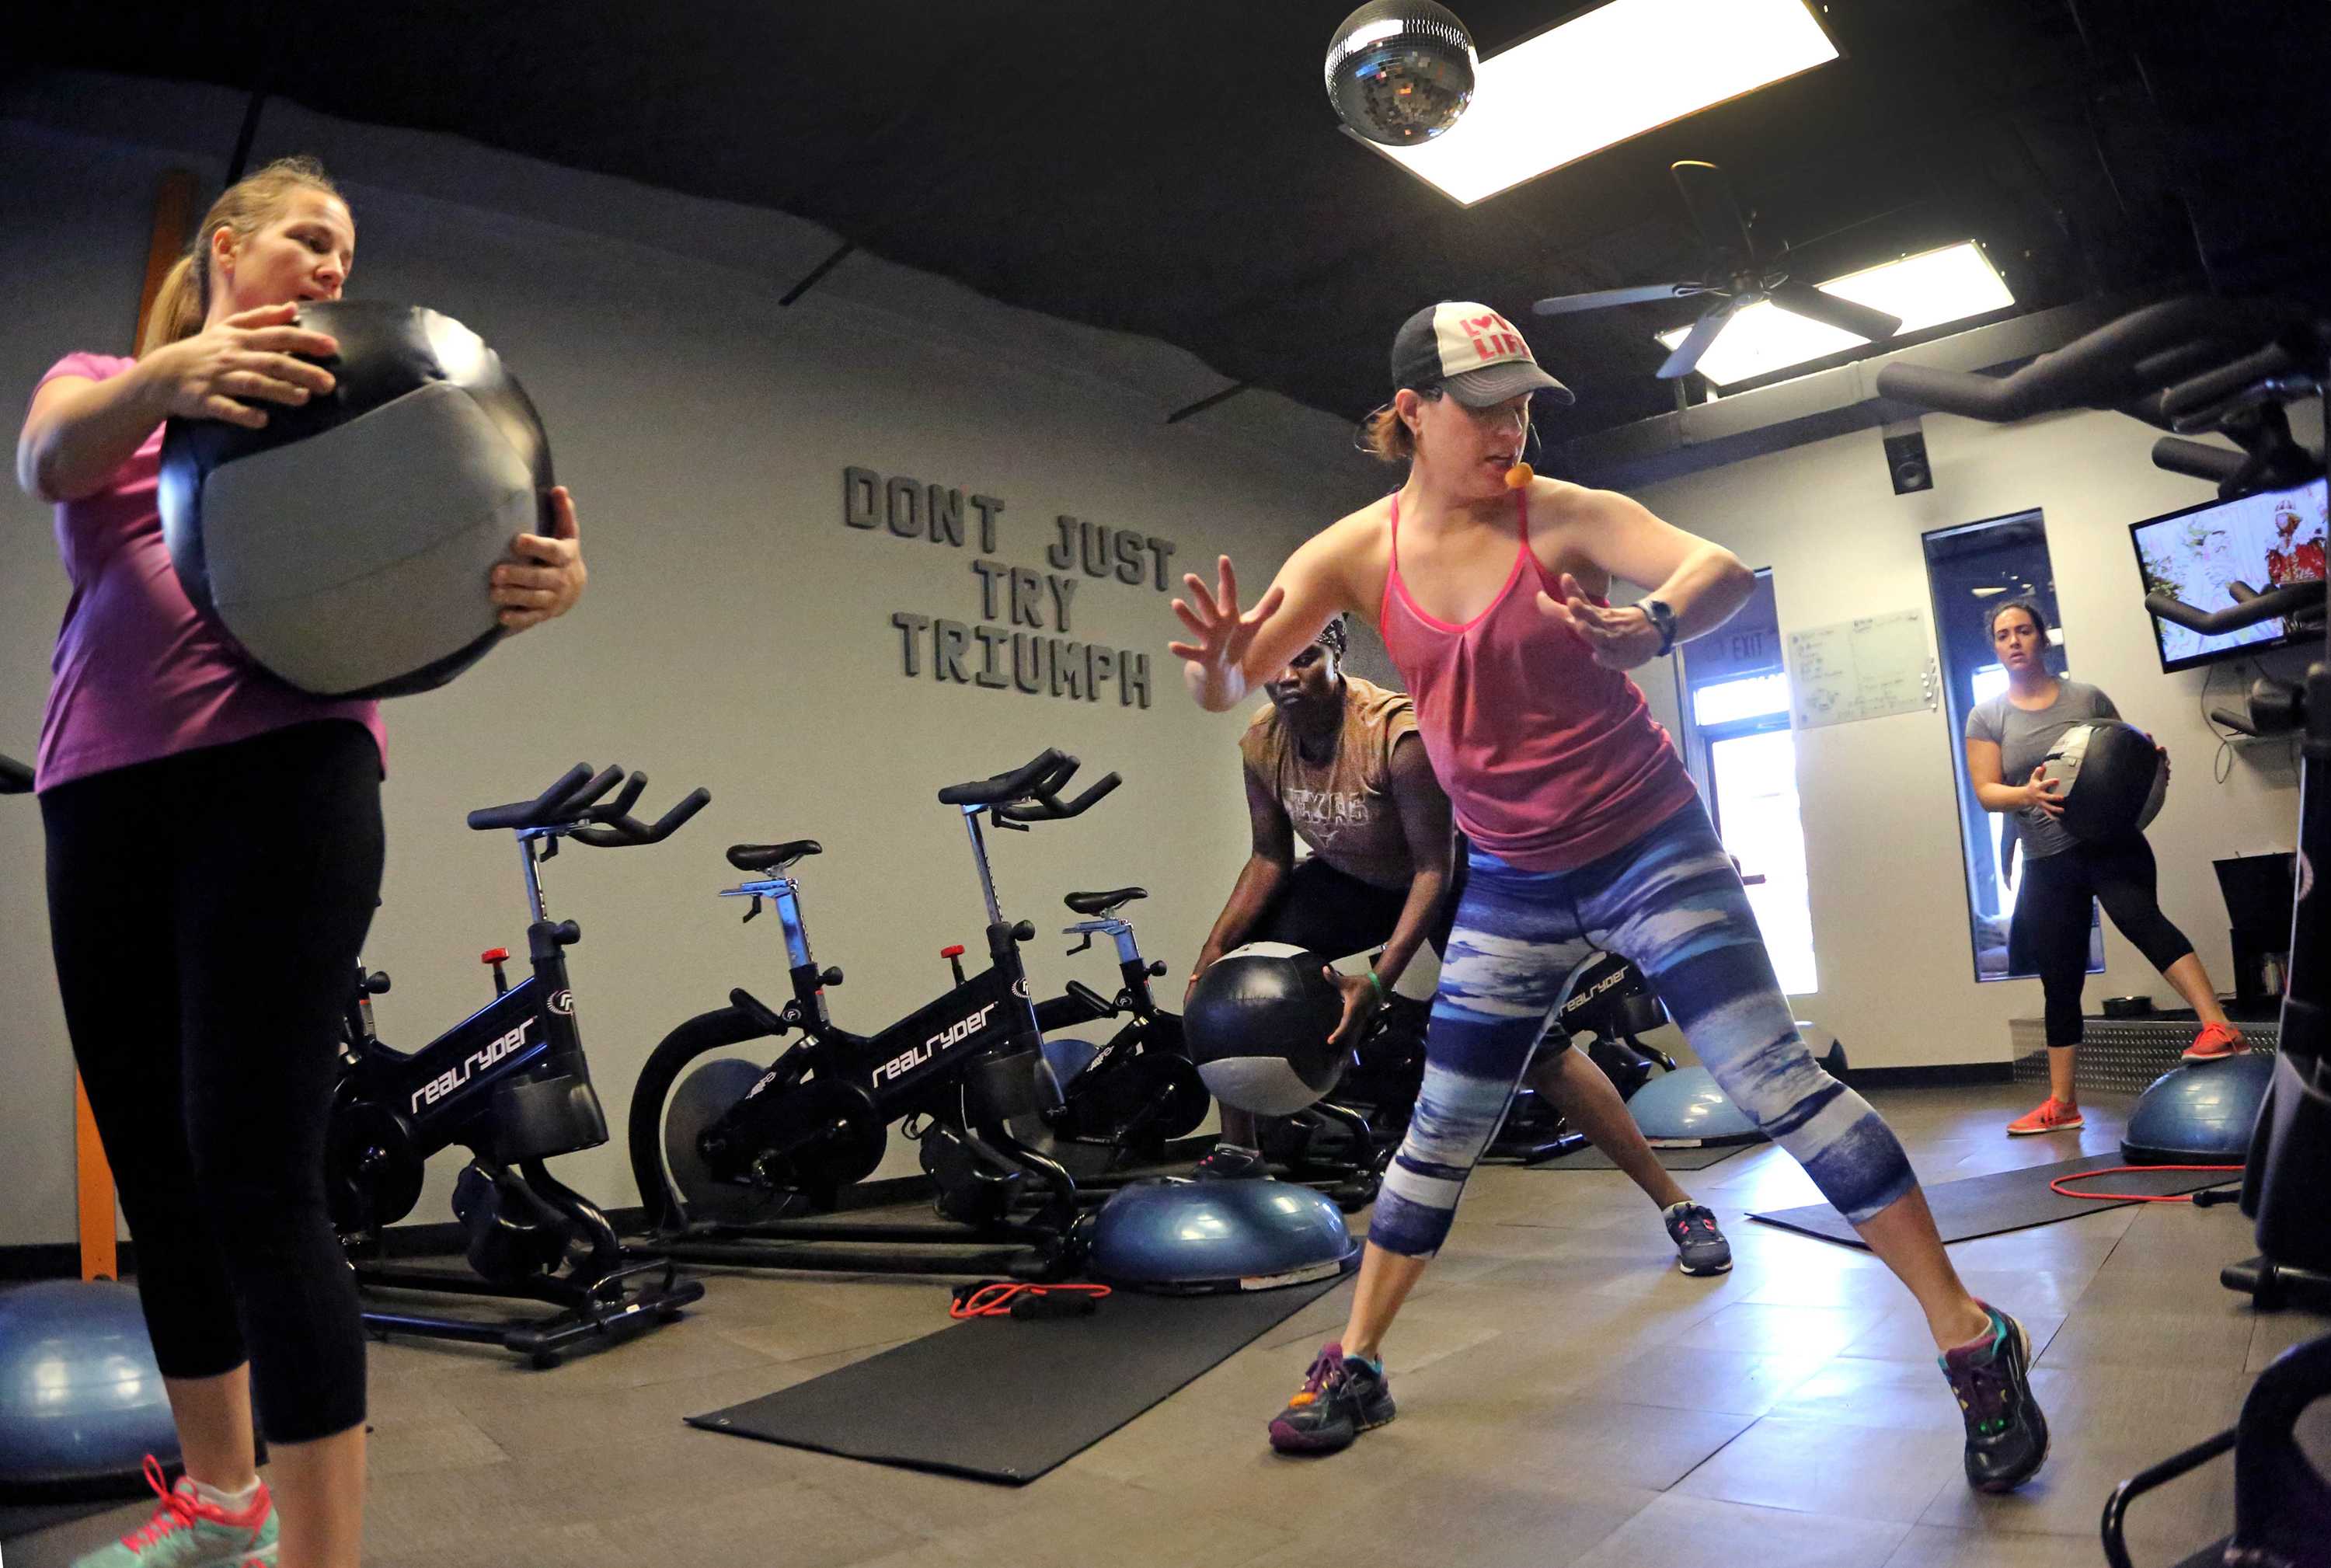 Molly Setnick, right, leading a workout at her studio, Crowbar Cardio, says fun is a motivator, but people still need to make a commitment to exercise. (Louis DeLuca/Dallas Morning News/TNS)